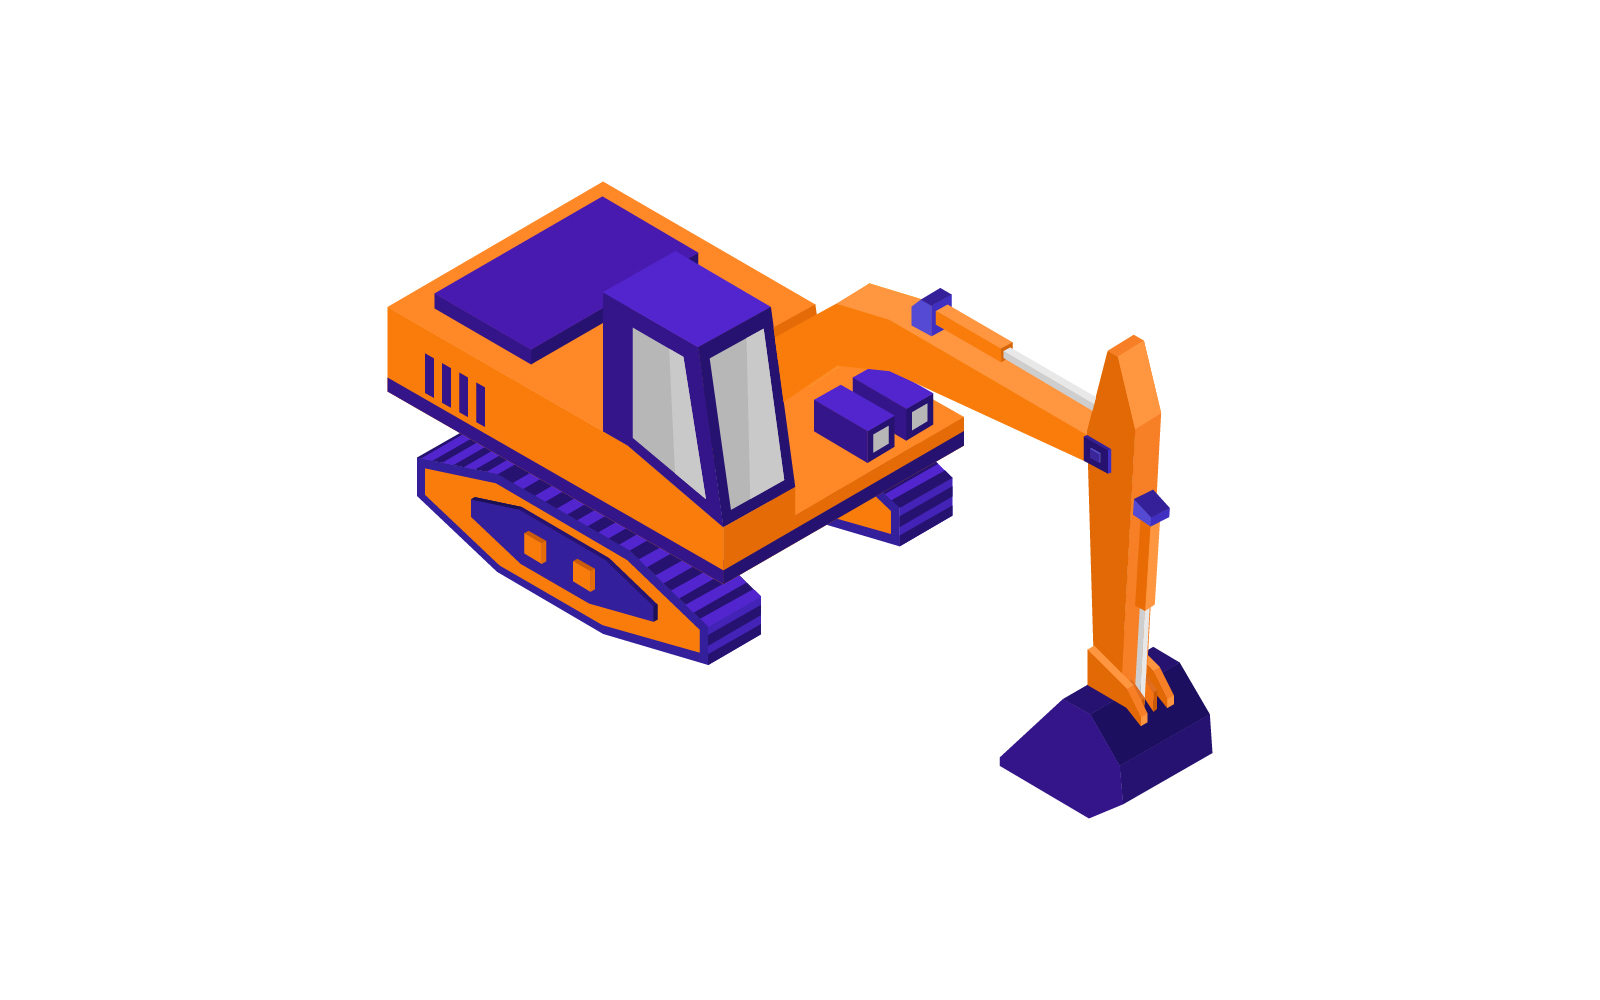 Excavator illustrated in vector and colored on a  background